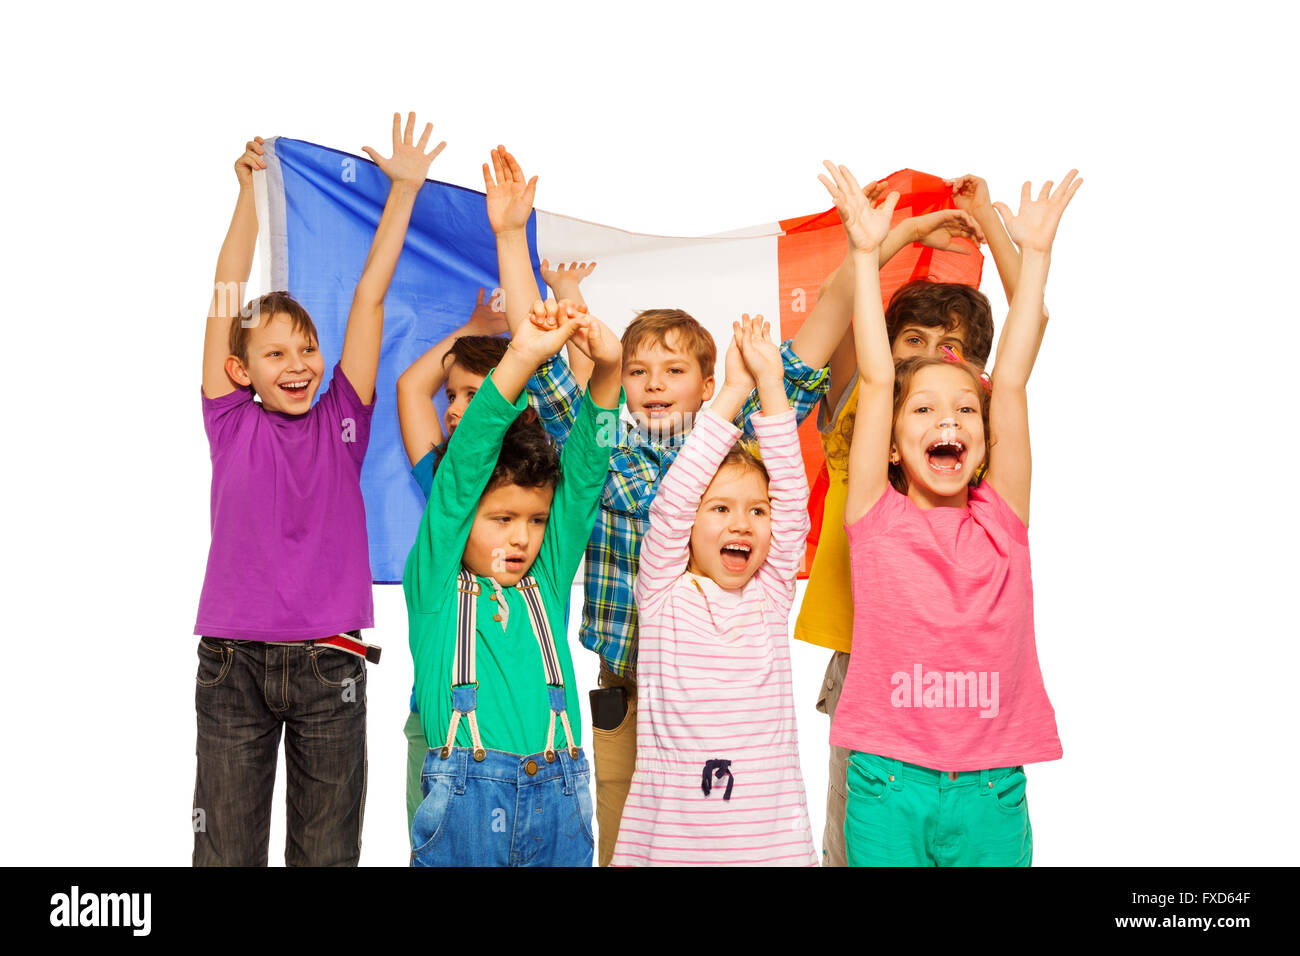 Group of seven kids smiling and waving French flag Stock Photo